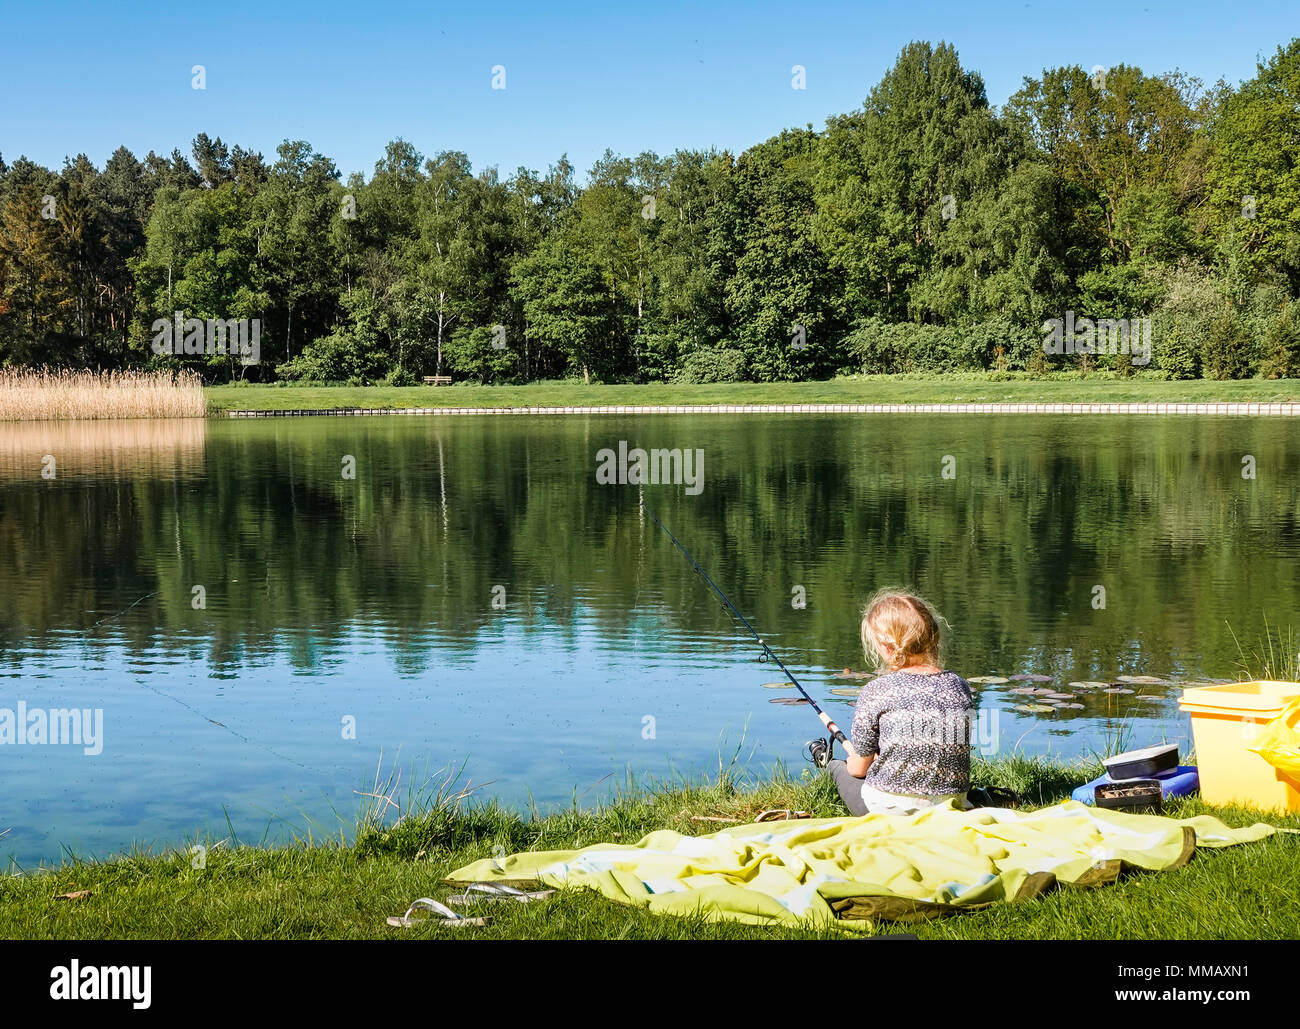 A young girl fishing Stock Photo